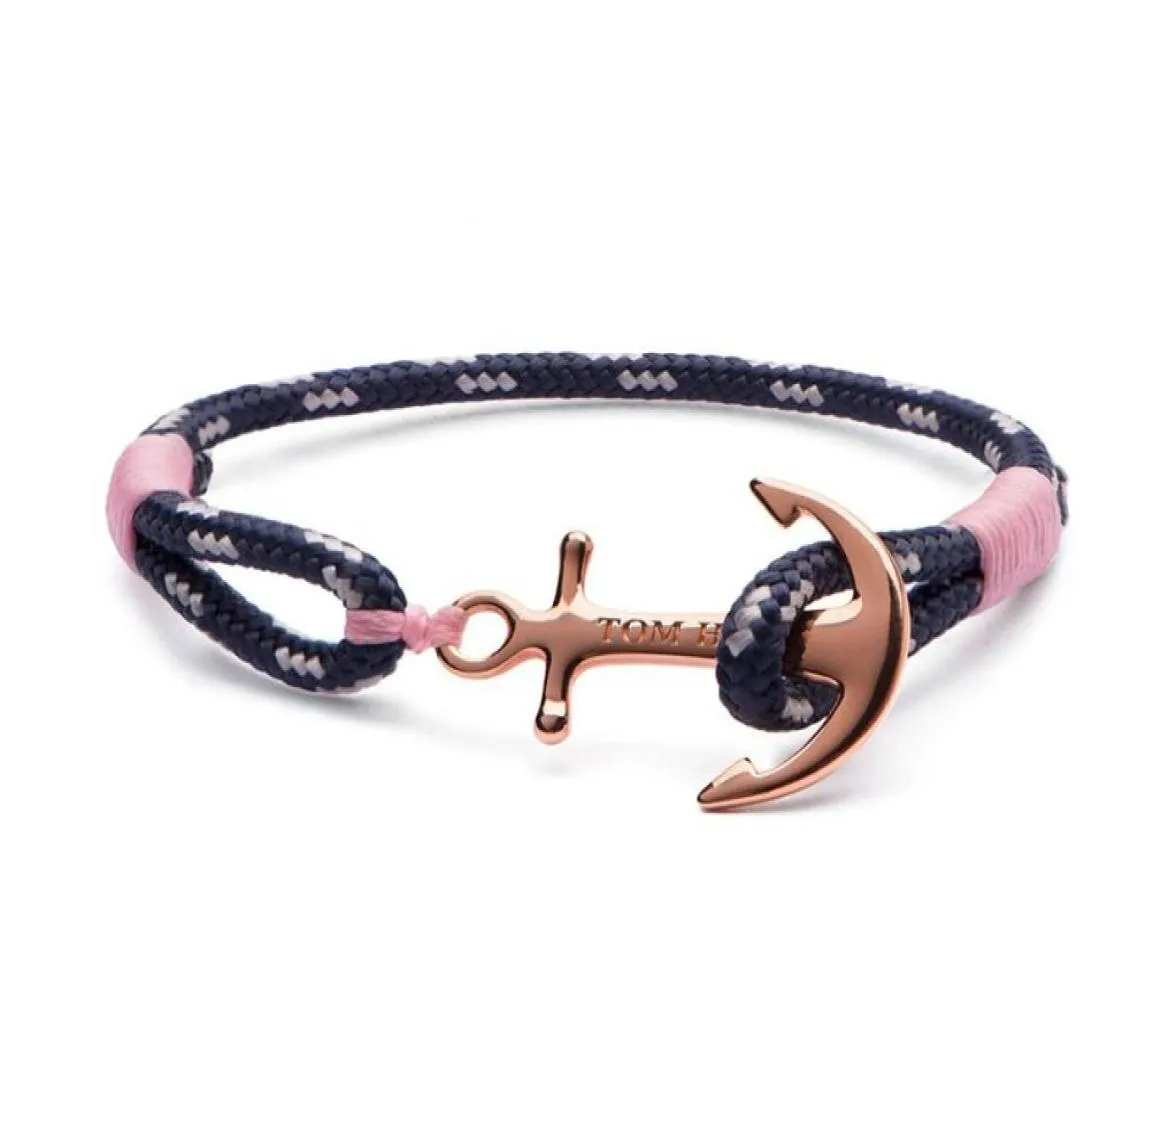 4 size stainless steel tom hope bracelet rose gold anchor Pink thread rope bangle with box and tag TH1363301762896748